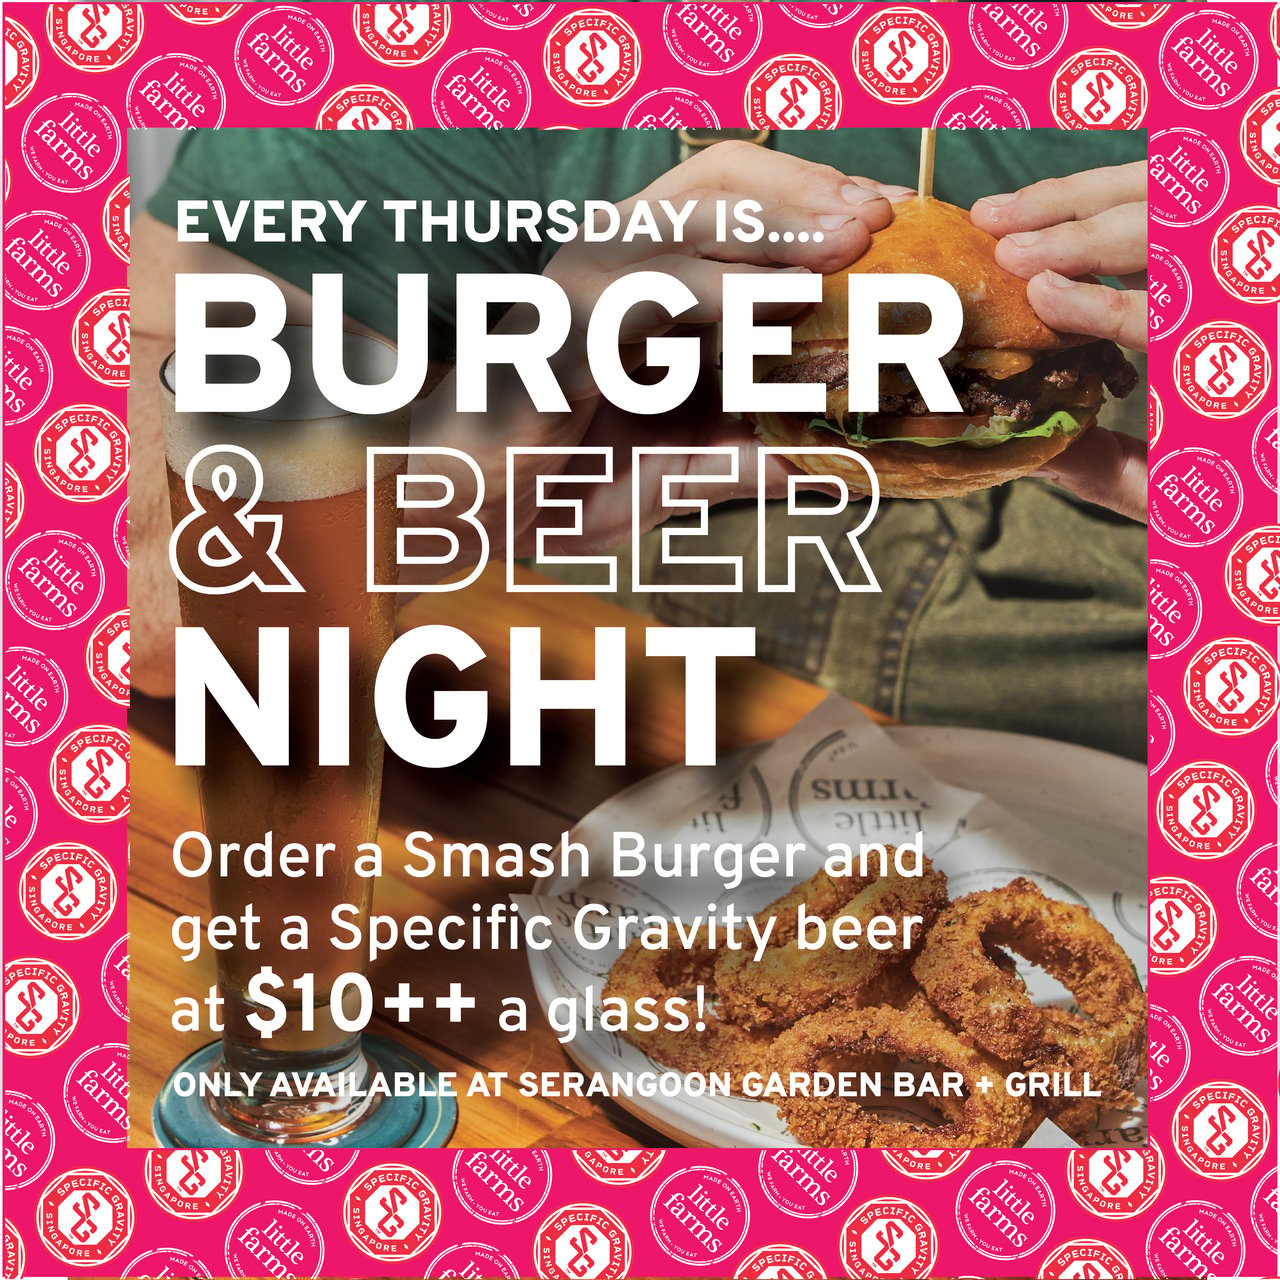 Every Thursday is Burger & Beer Night at Serangoon Garden where you can order a Smash Burger and get a Specific Gravity beer at $10++ a glass!